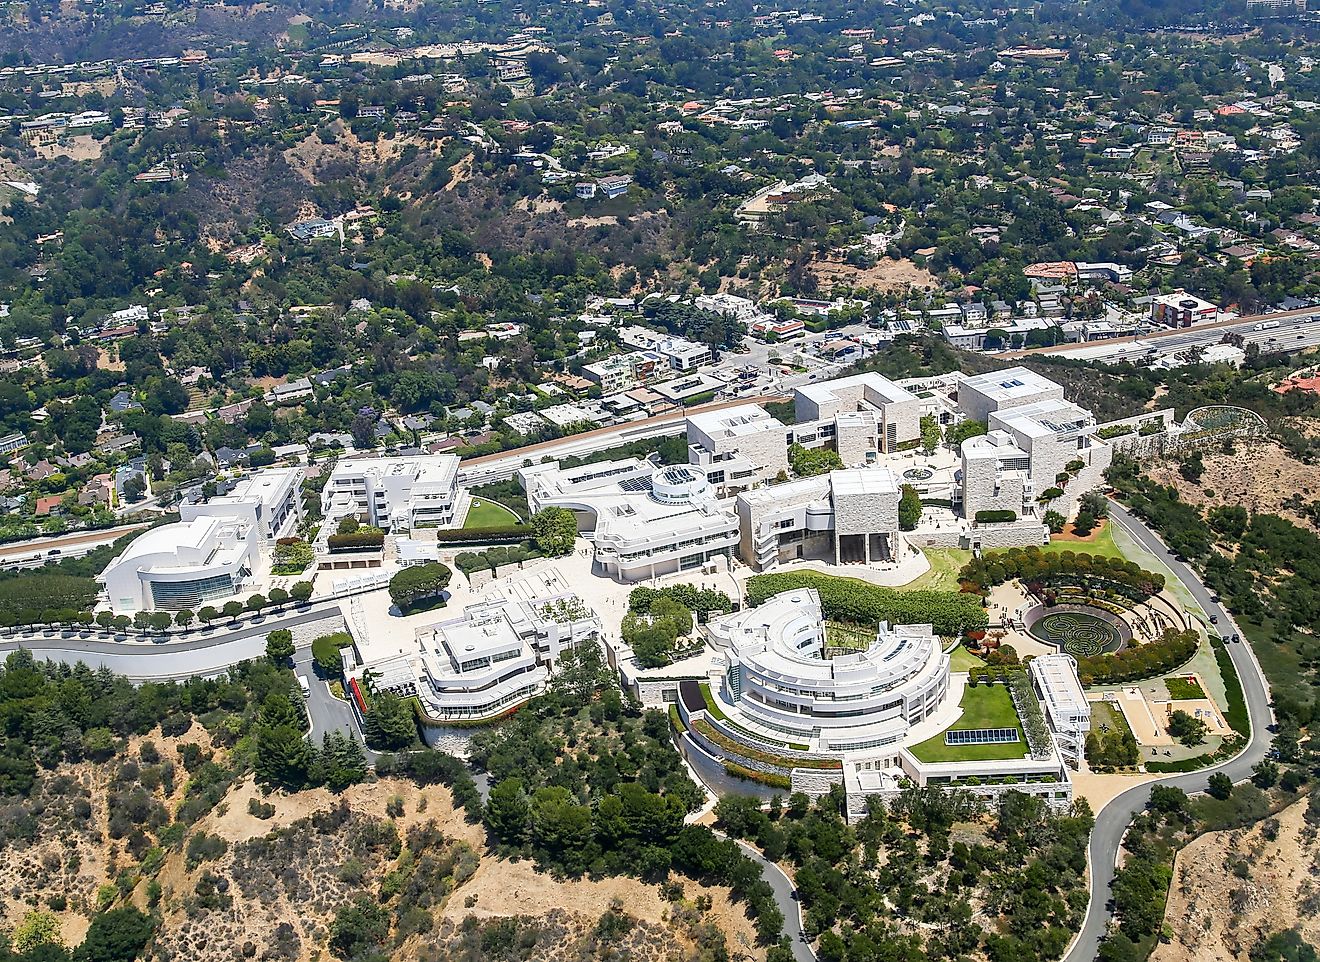 Aerial view of the Getty Center. Image credits: Michael Rosebrock via Shutterstock